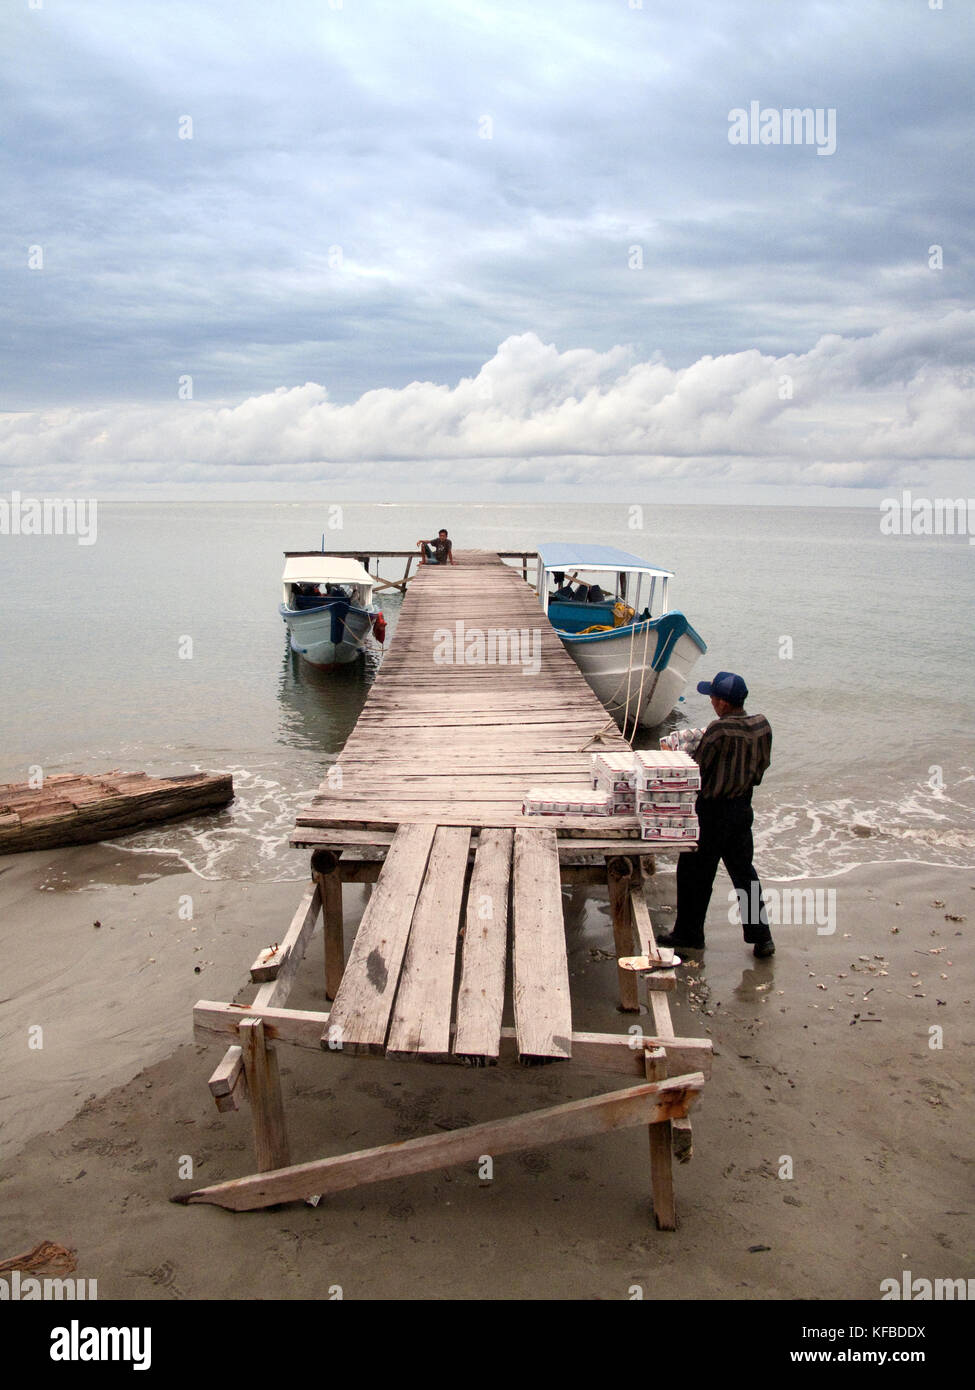 INDONESIA, Mentawai Islands, man carrying supplies to load onto boats at boat dock Stock Photo